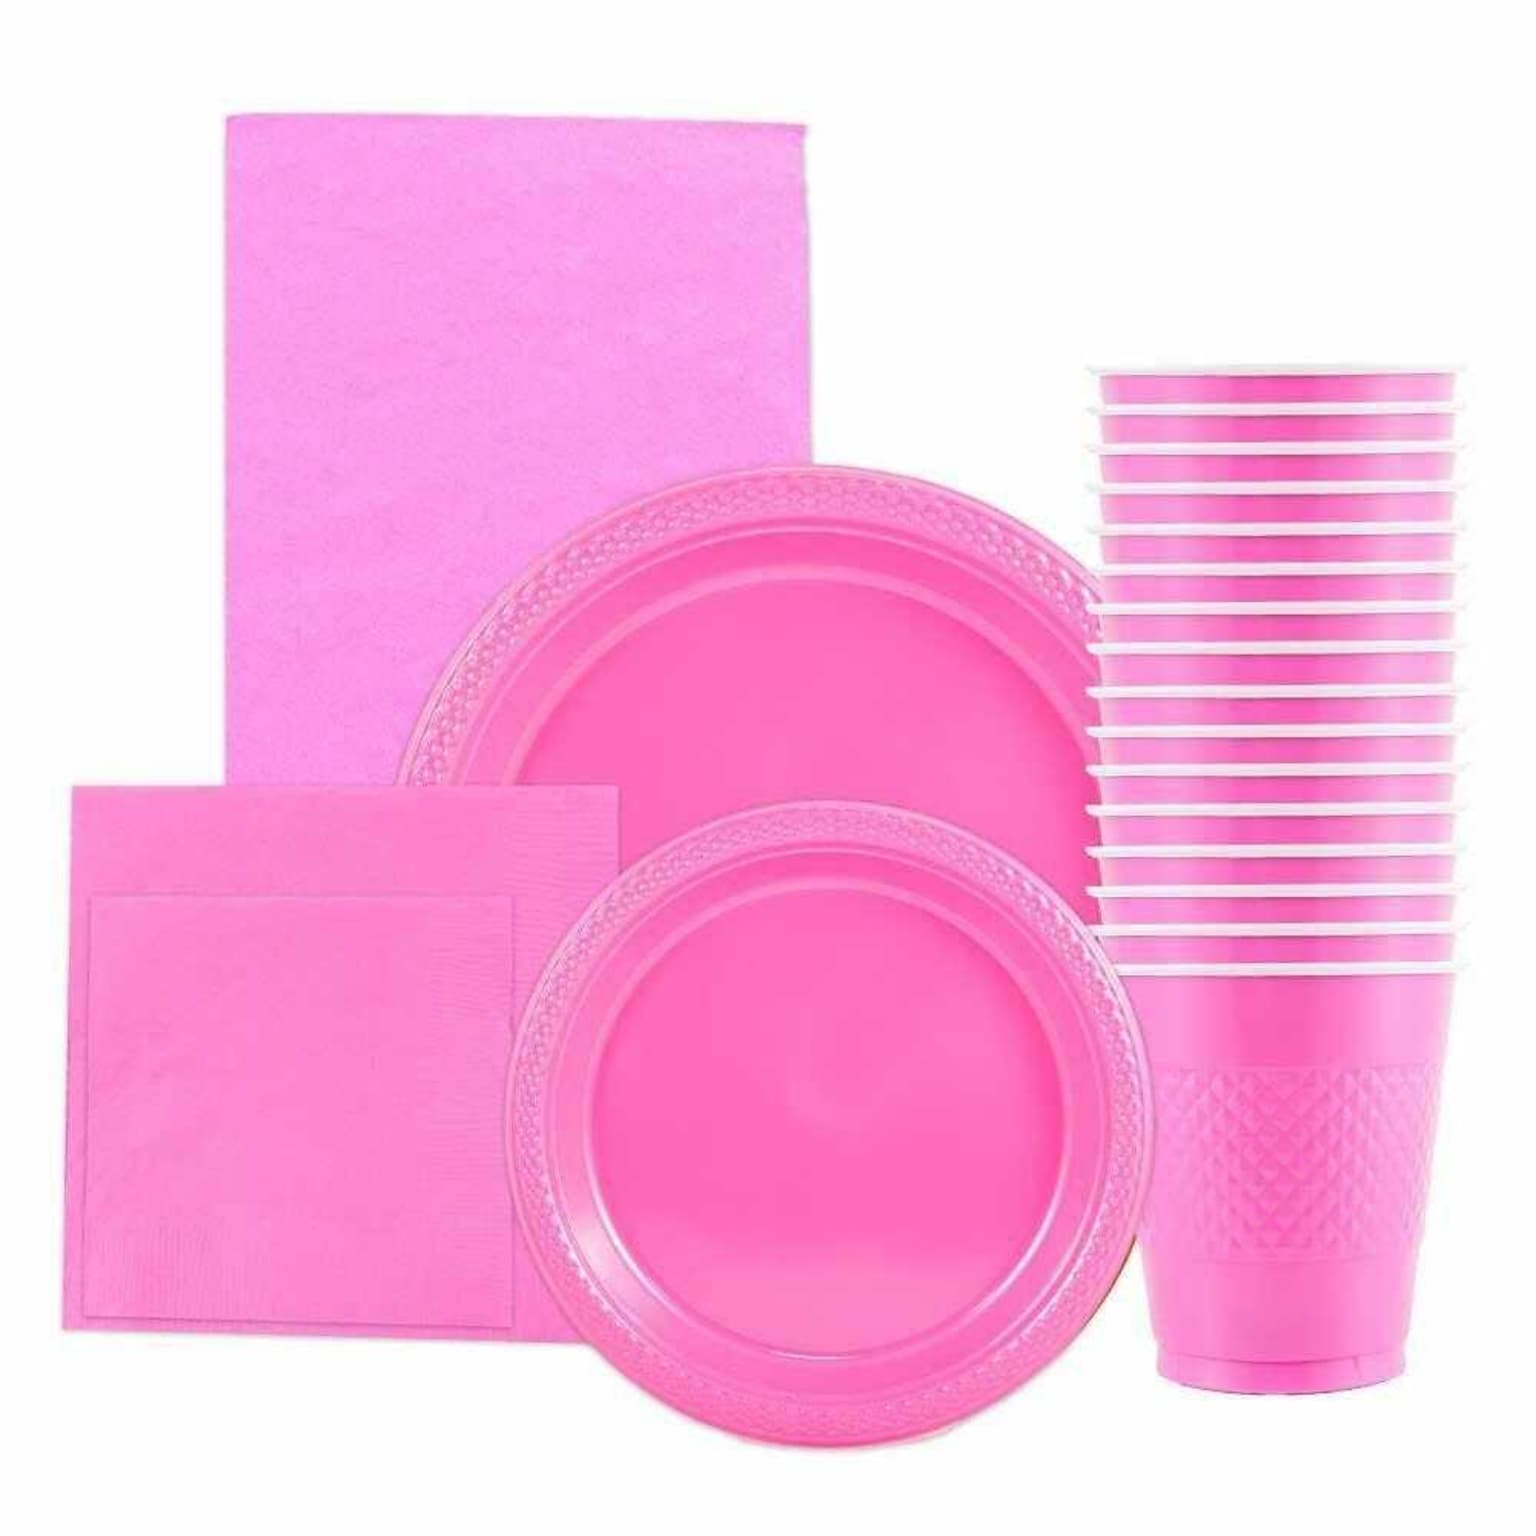 JAM PAPER Party Supply Assortment, Fuchsia Pink, Plates, Napkins, Cups & Tablecloth, 6/Pack (255PPPINKS)